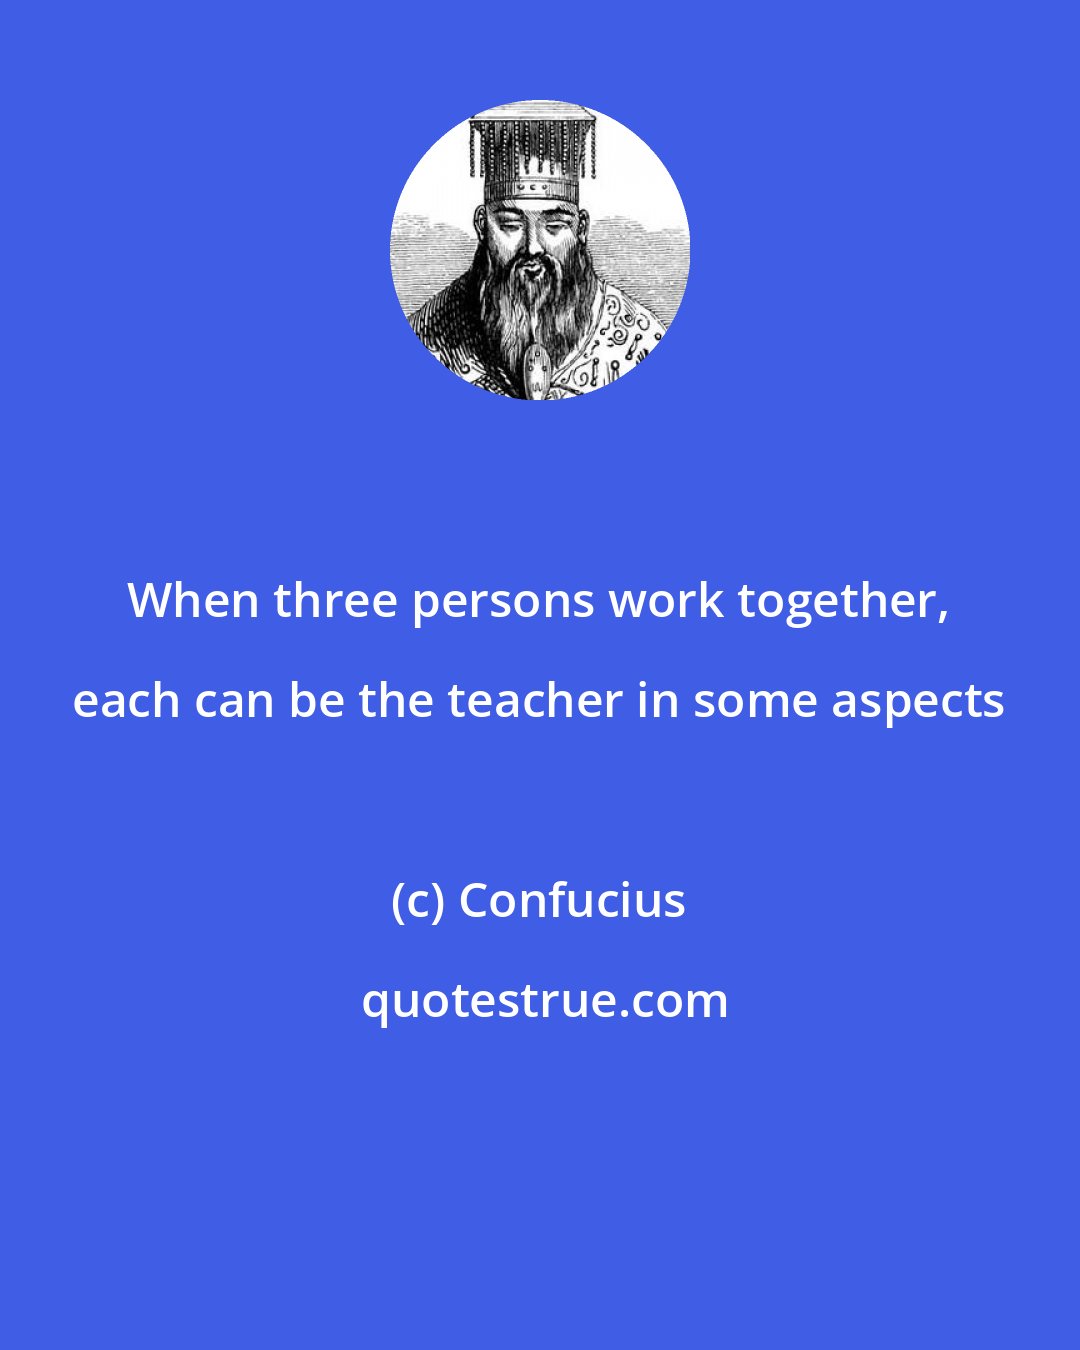 Confucius: When three persons work together, each can be the teacher in some aspects